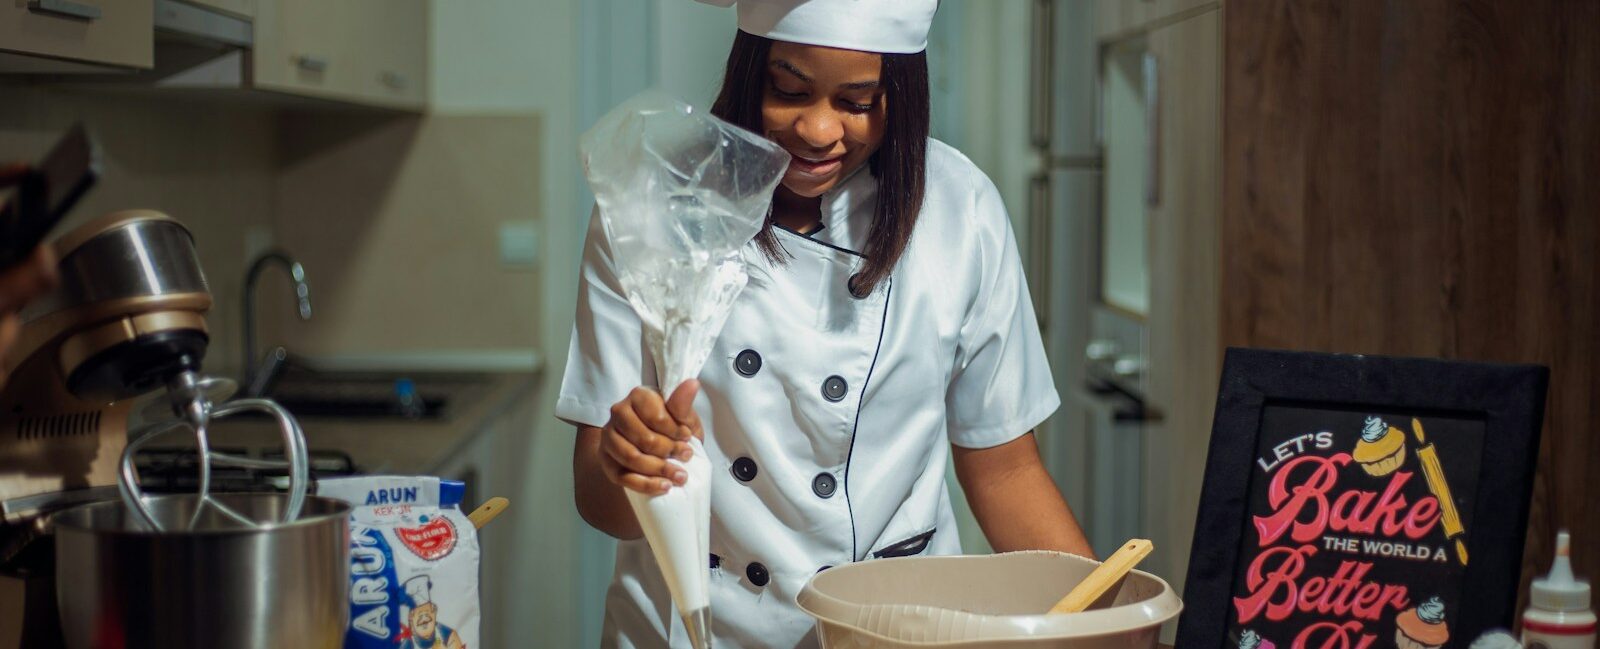 a woman in a chef's outfit preparing food in a kitchen